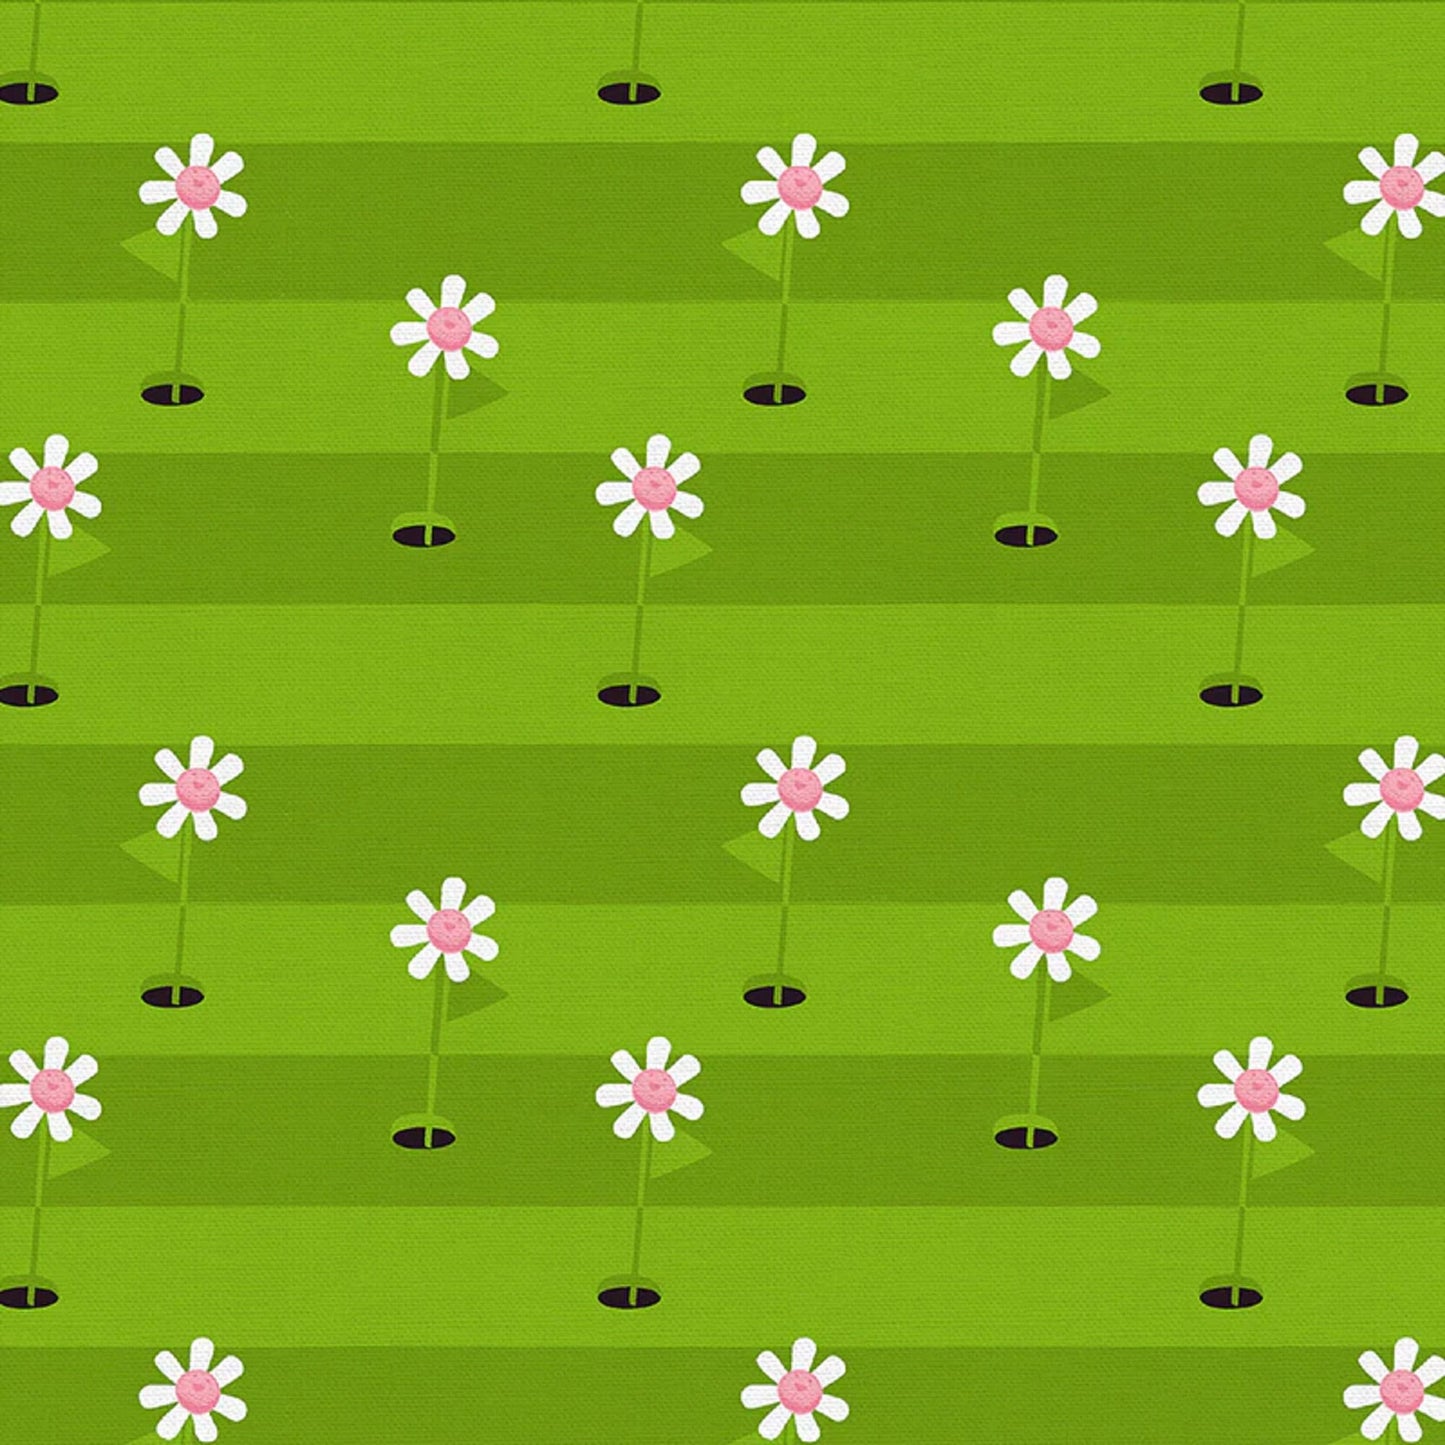 Hole in One Green Le Mini Golf Lysa Flower Paintbrush Studio Fabric 100% Quilters Cotton Fabric Fetish